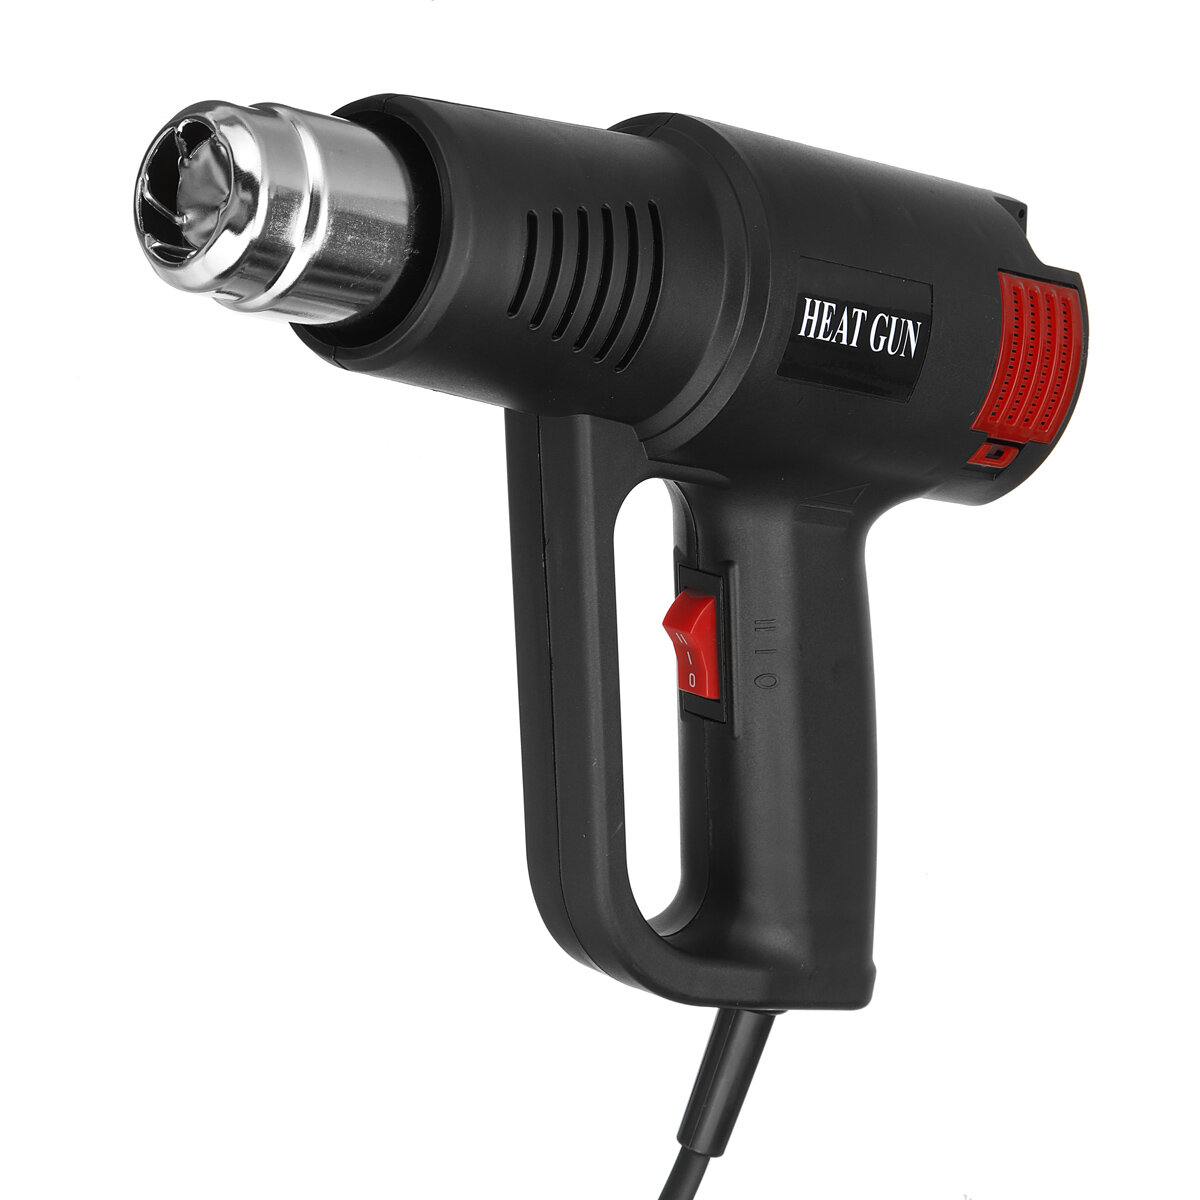 2000W 220V Hot Air Guns 2-Gears Adjustable Electric Heat Guns for Stripping Paint Removing Rusted Bo